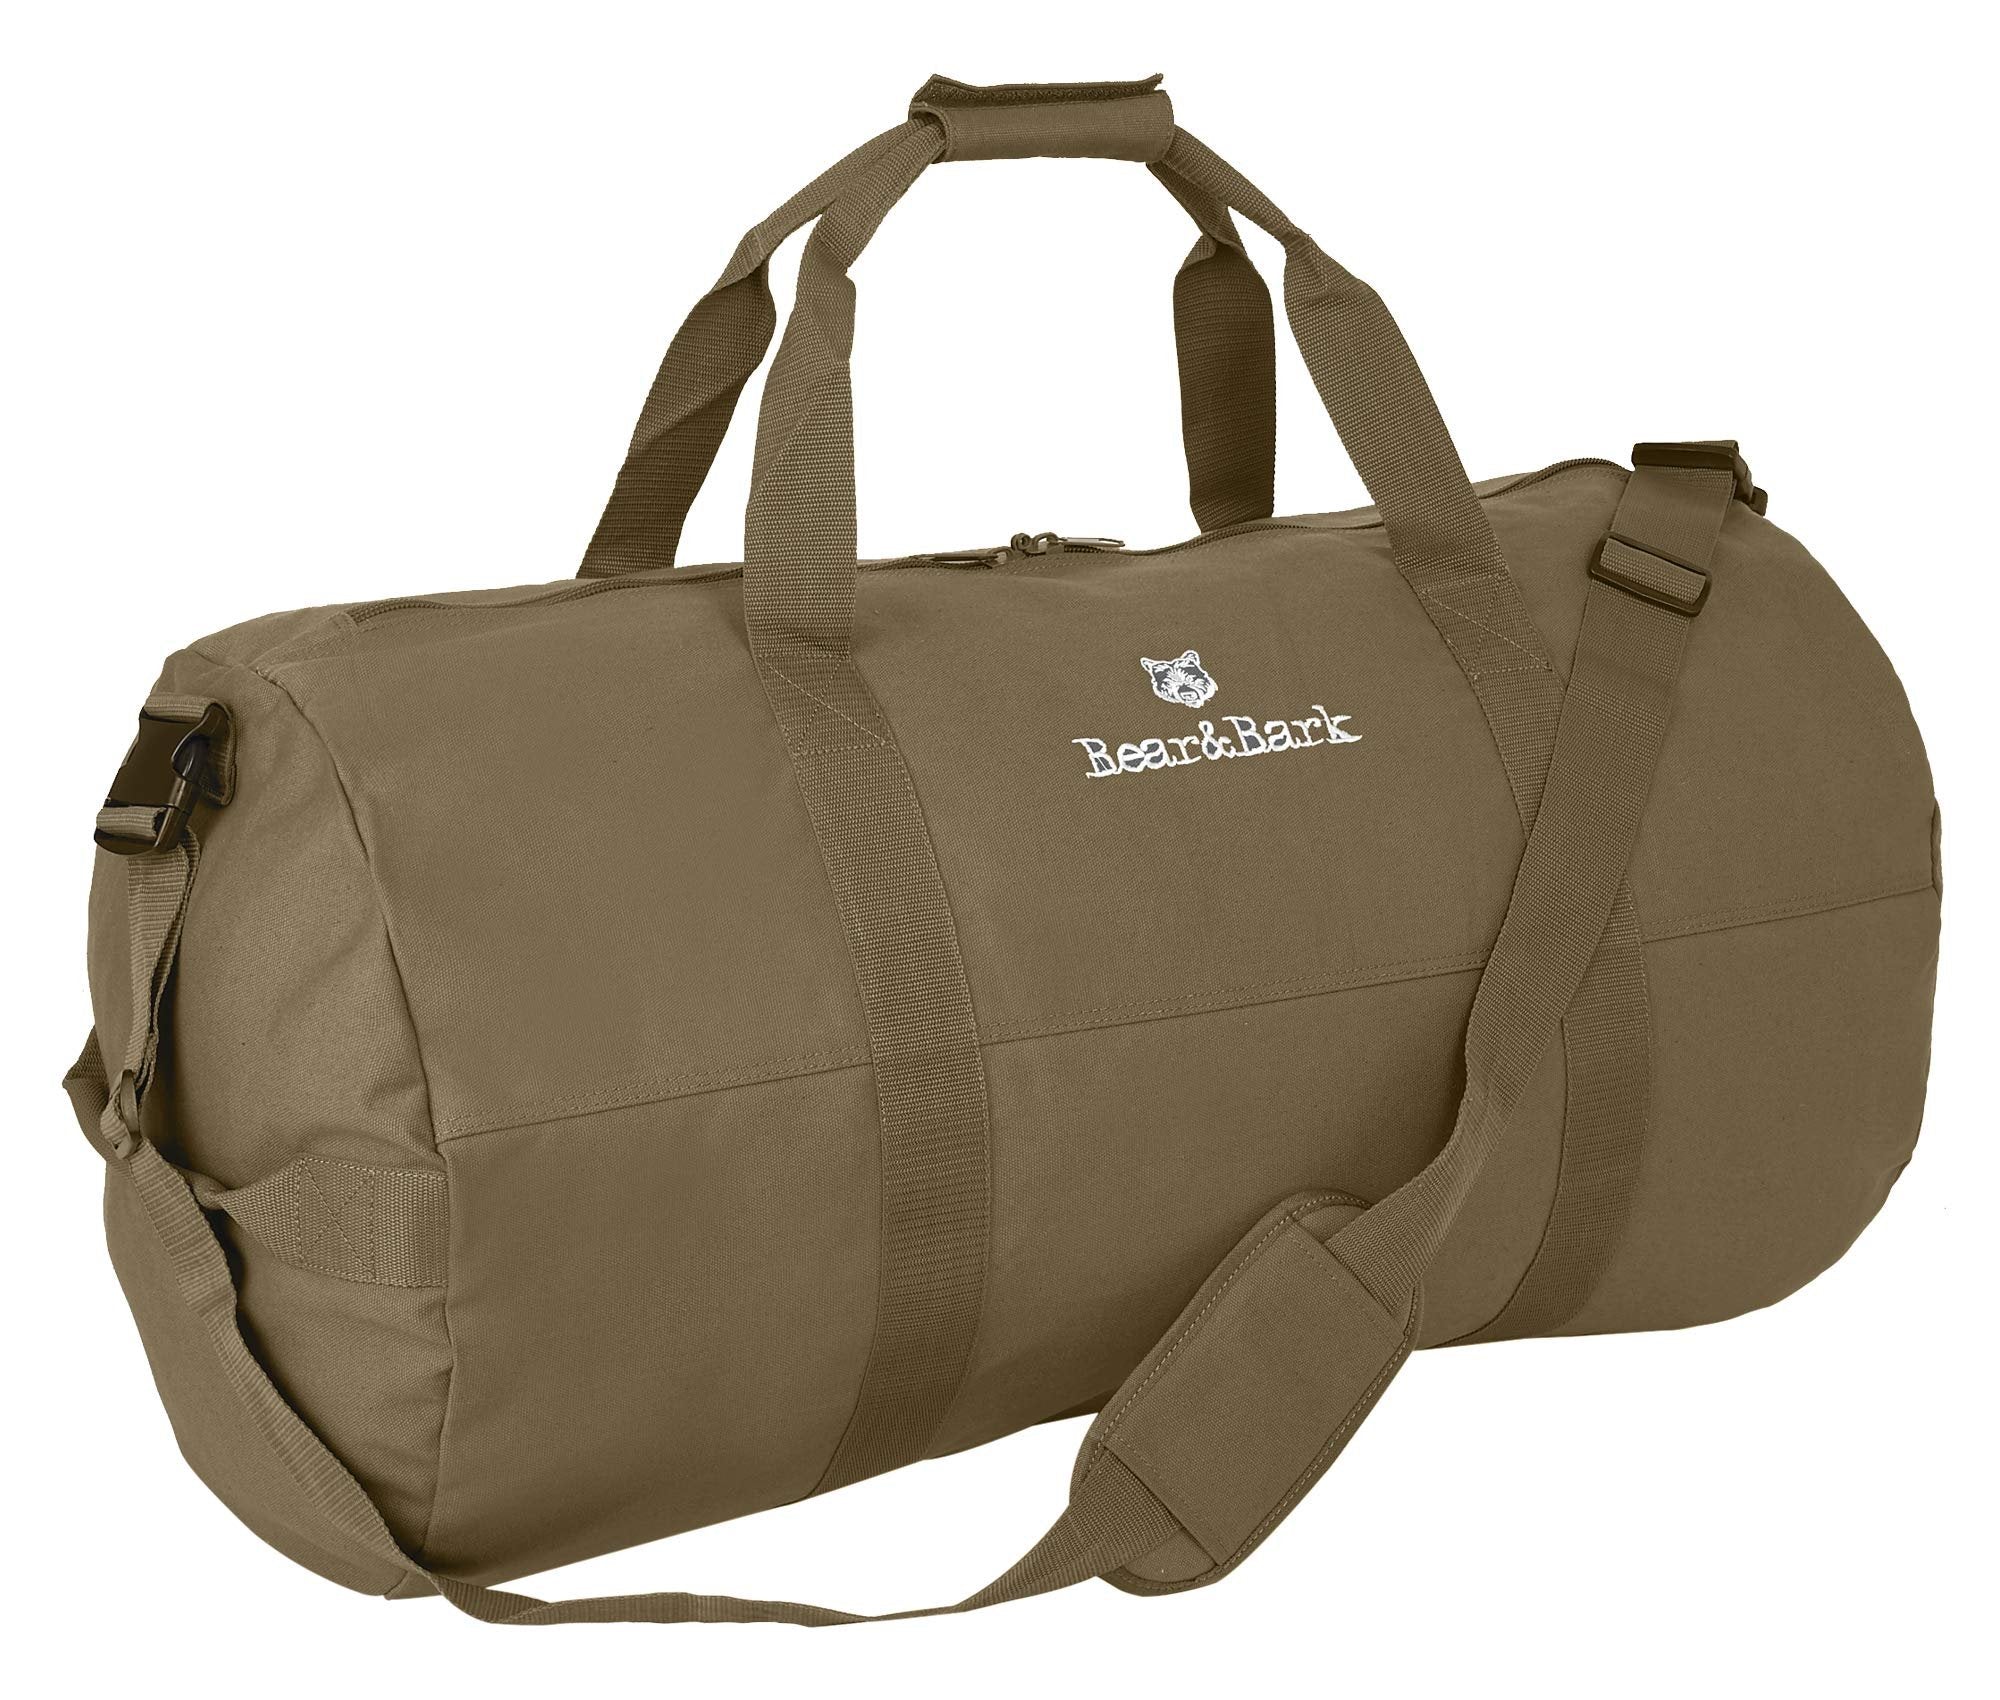 Bear&Bark Military Green Duffle Bag - Standard 32" X 18" - 133.4L Canvas Cargo Style Travel Luggage for Men and Women - Hiking, Student, Backpacking, Storage Shoulder Tote Bag